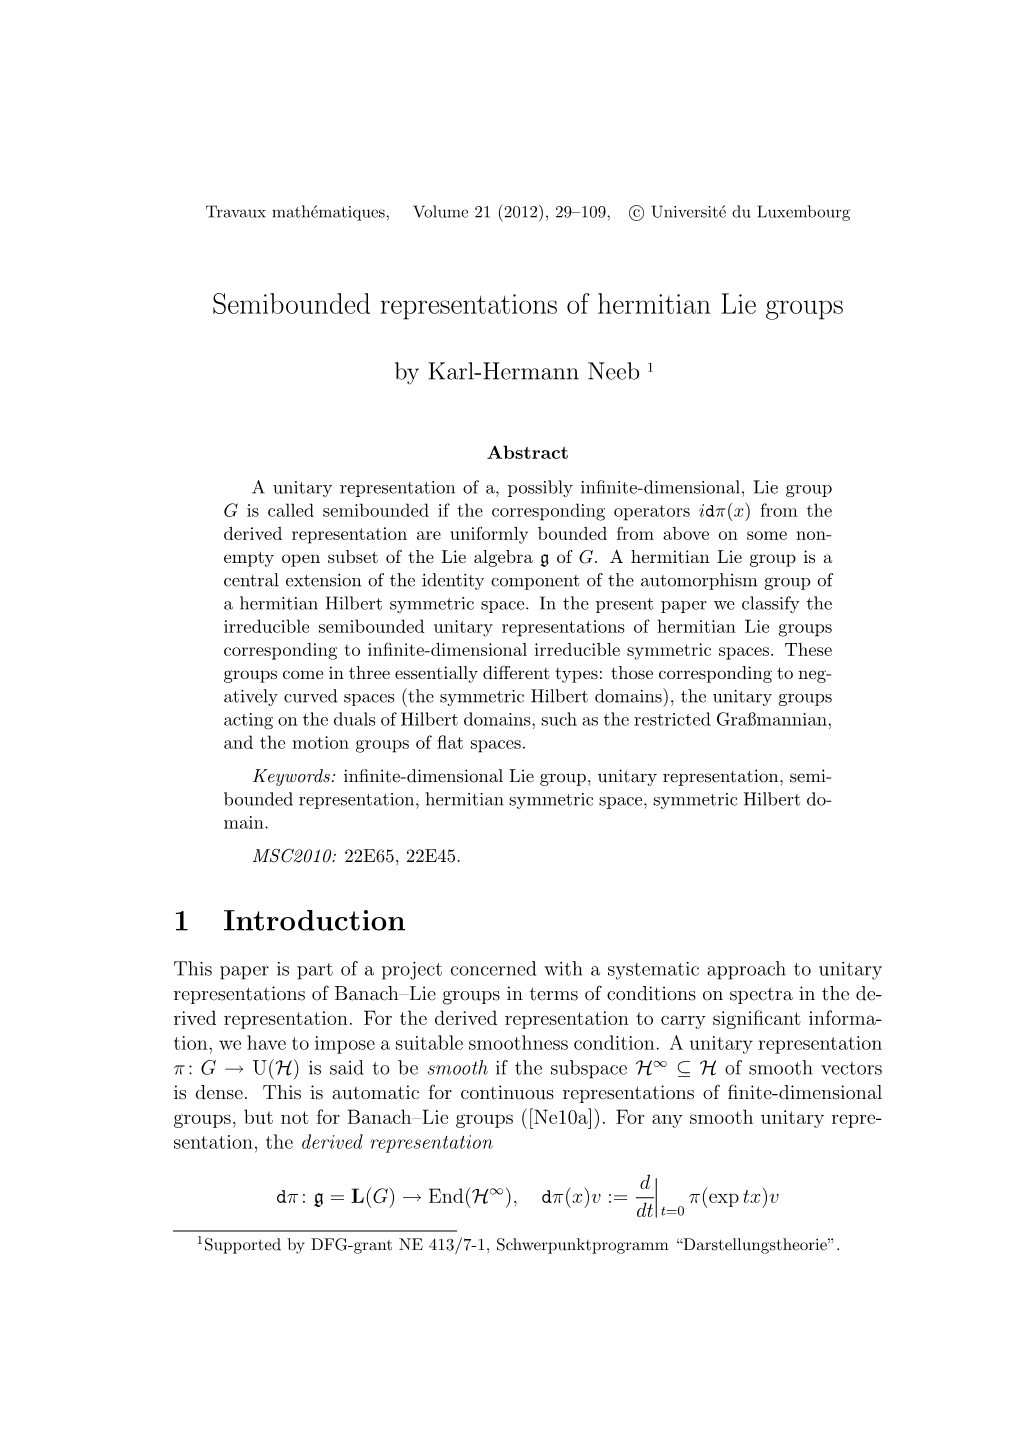 Semibounded Representations of Hermitian Lie Groups